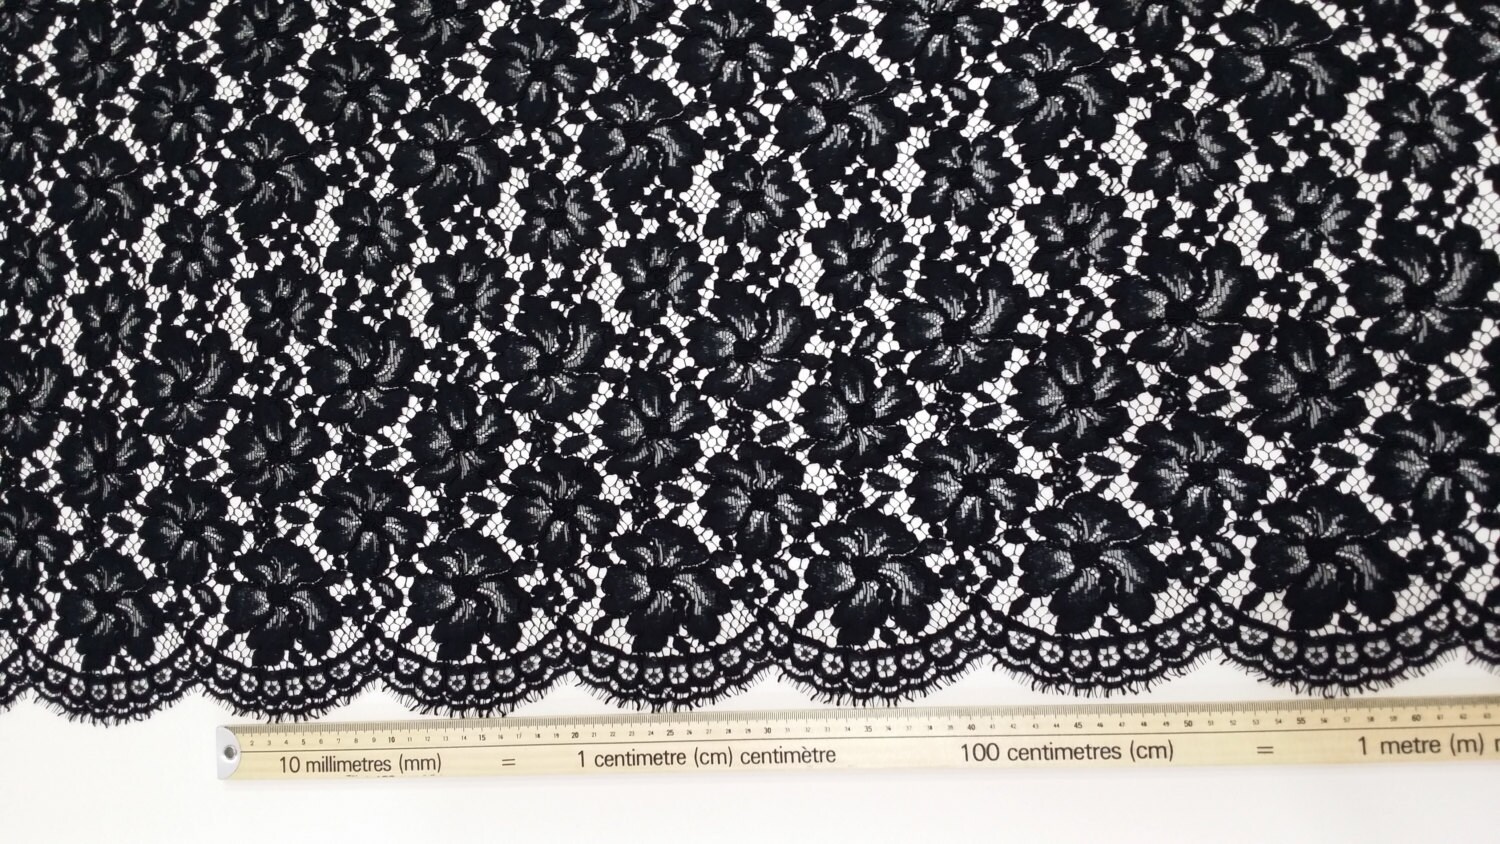  Black Raschel Lace Fabric – Sold by The Yard (FB